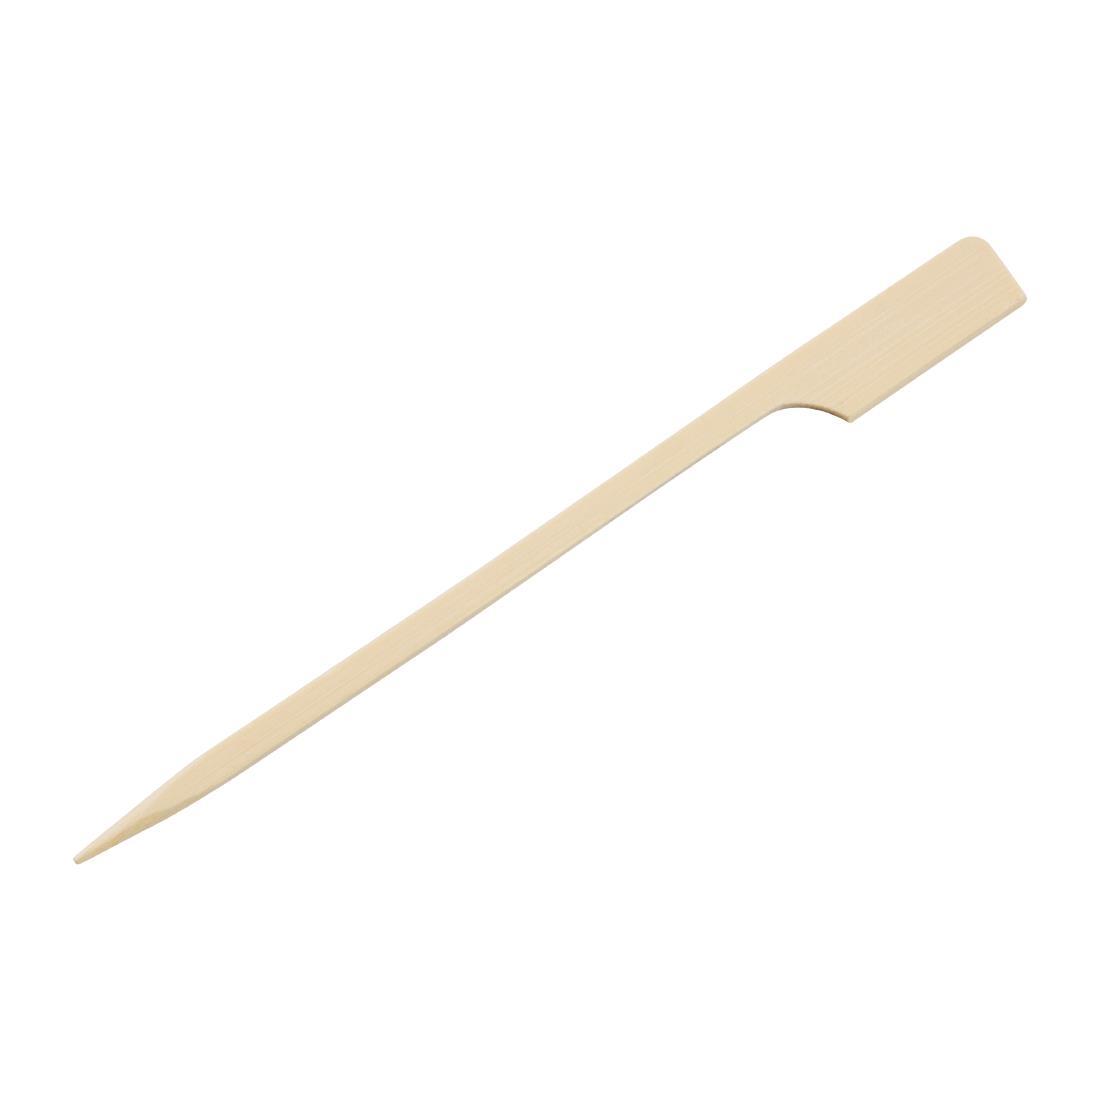 Fiesta Compostable Bamboo Paddle Skewers 120mm (Pack of 100) - DB496  - 1